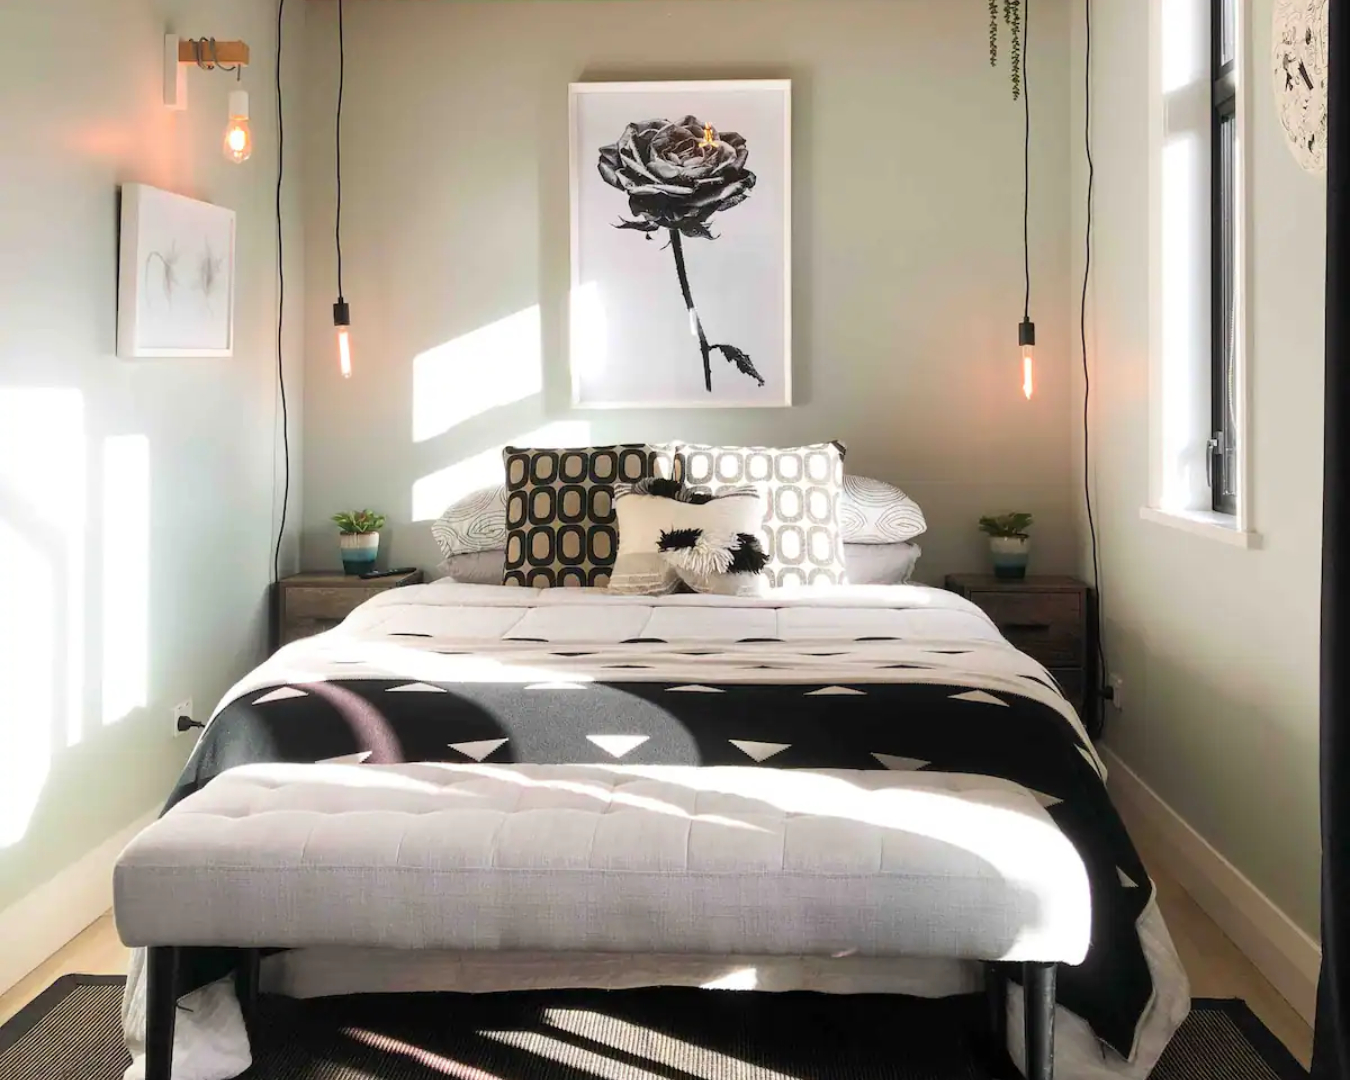 The lush bedroom at the Mount Victoria Studio is decked out in stylish, monochromatic decor 